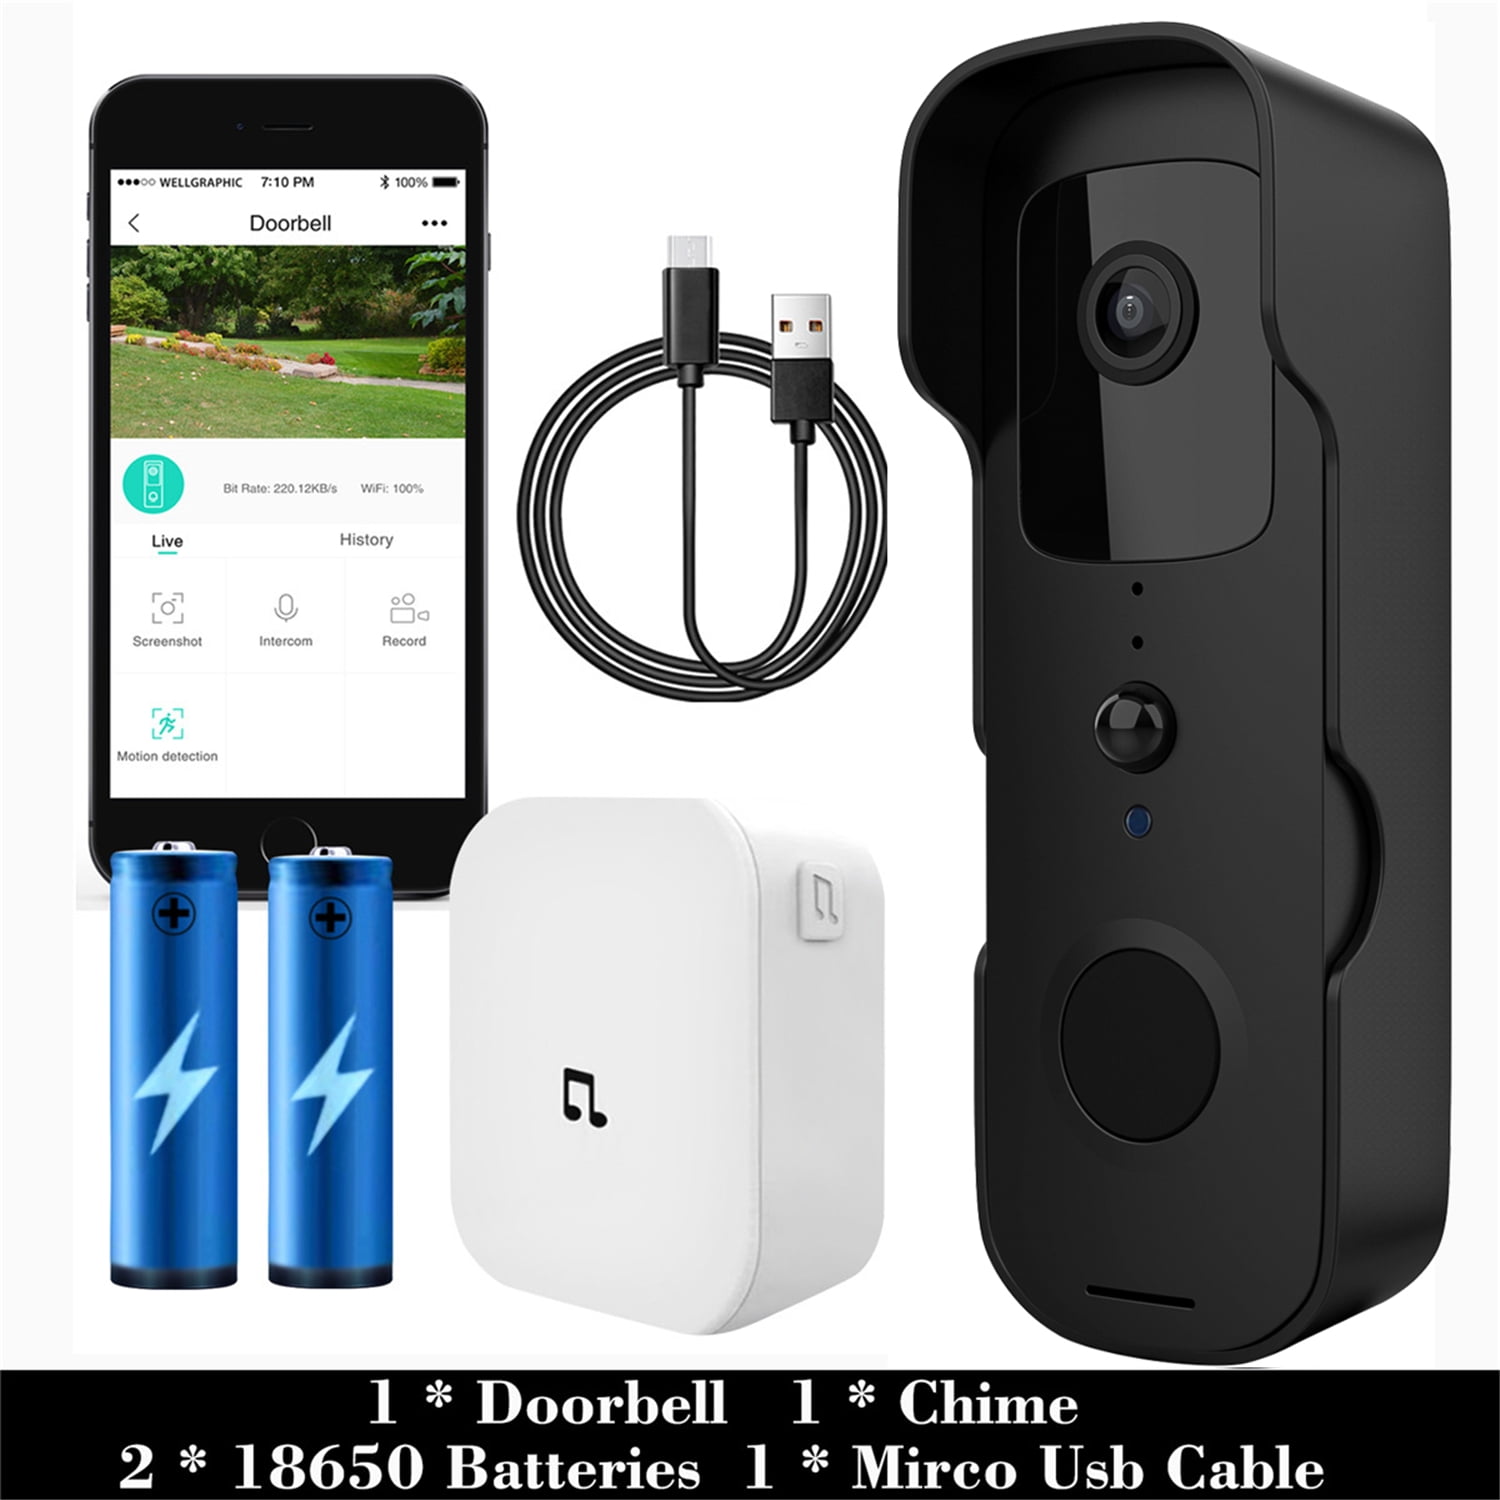 Details about   【32GB Preinstalled】WiFi Video Doorbell，1080P Doorbell Camera with Free Chime